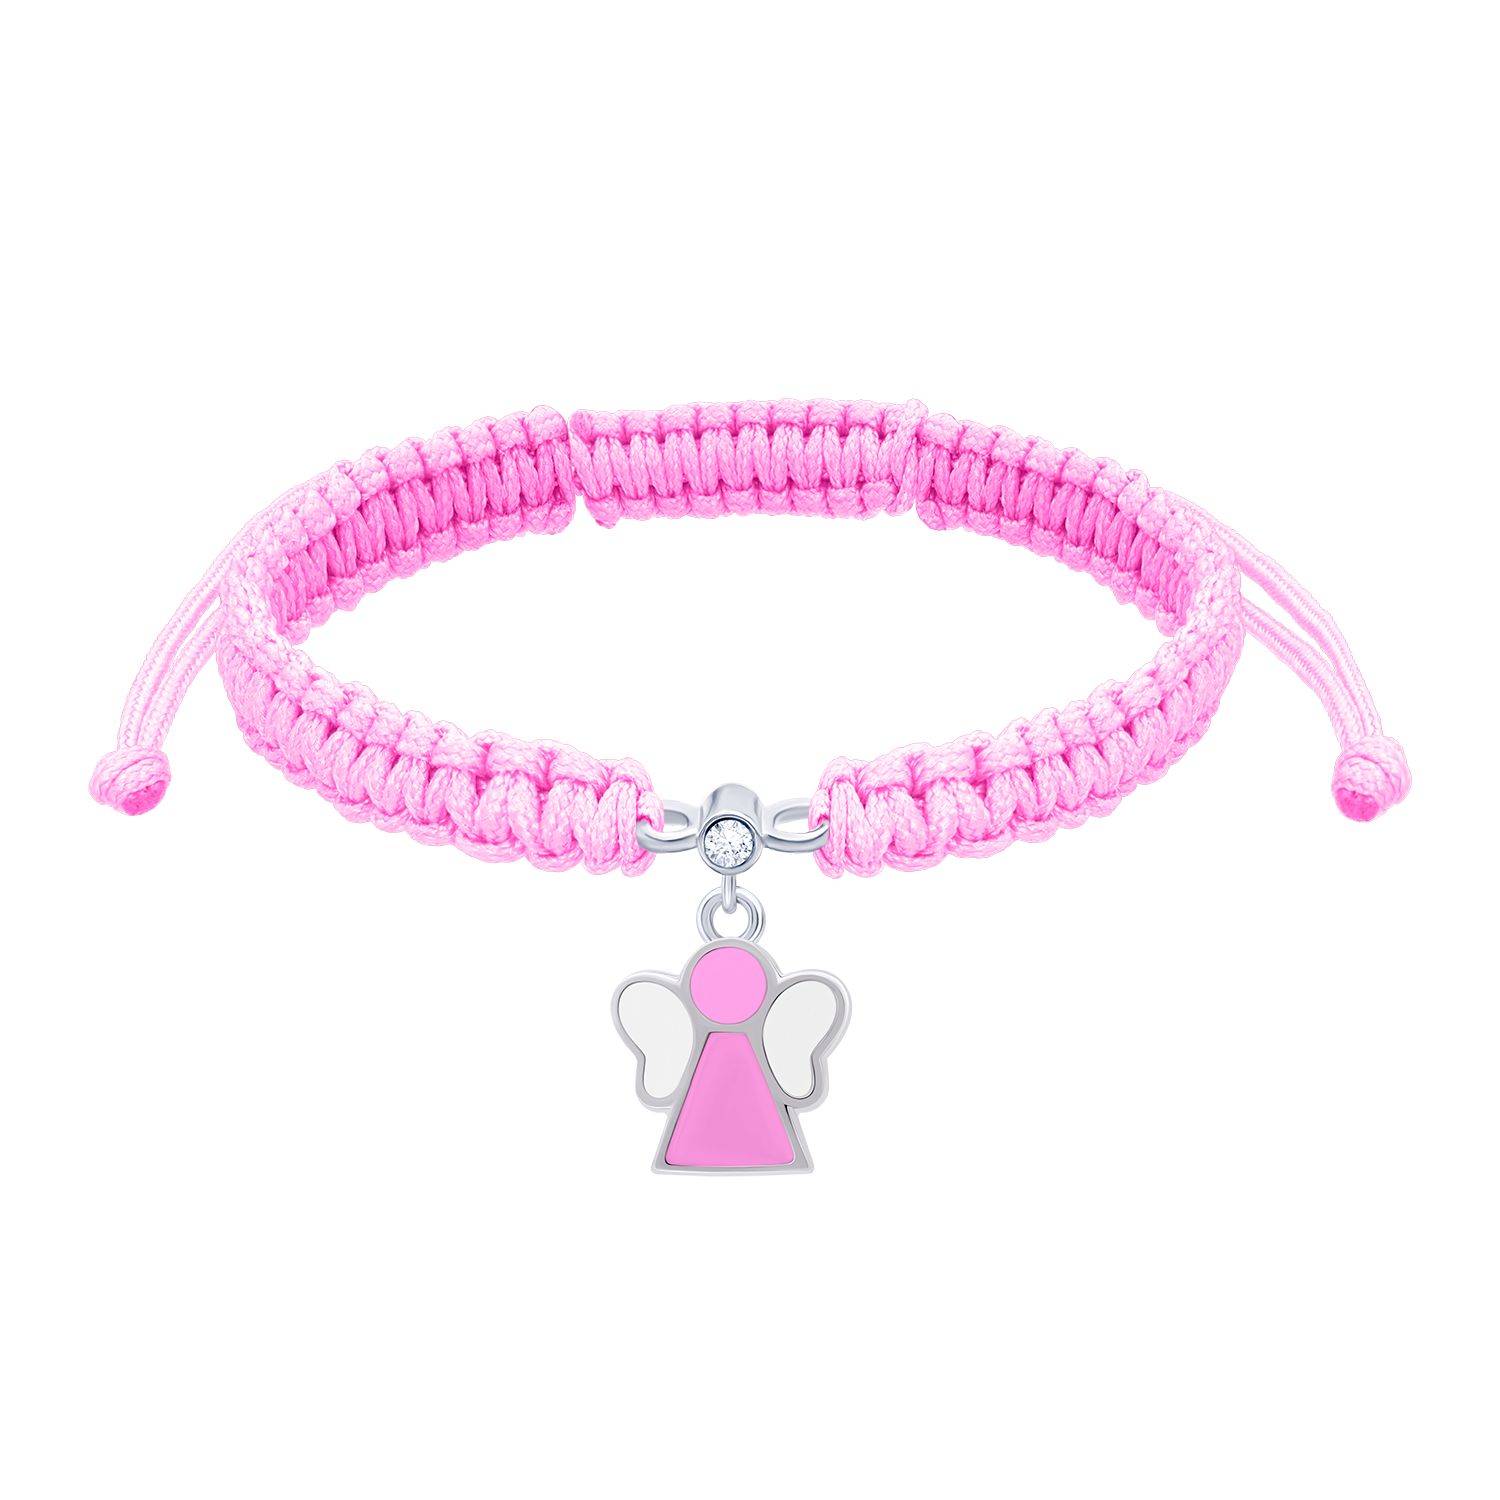 Braided bracelet Angel with pink and white enamel